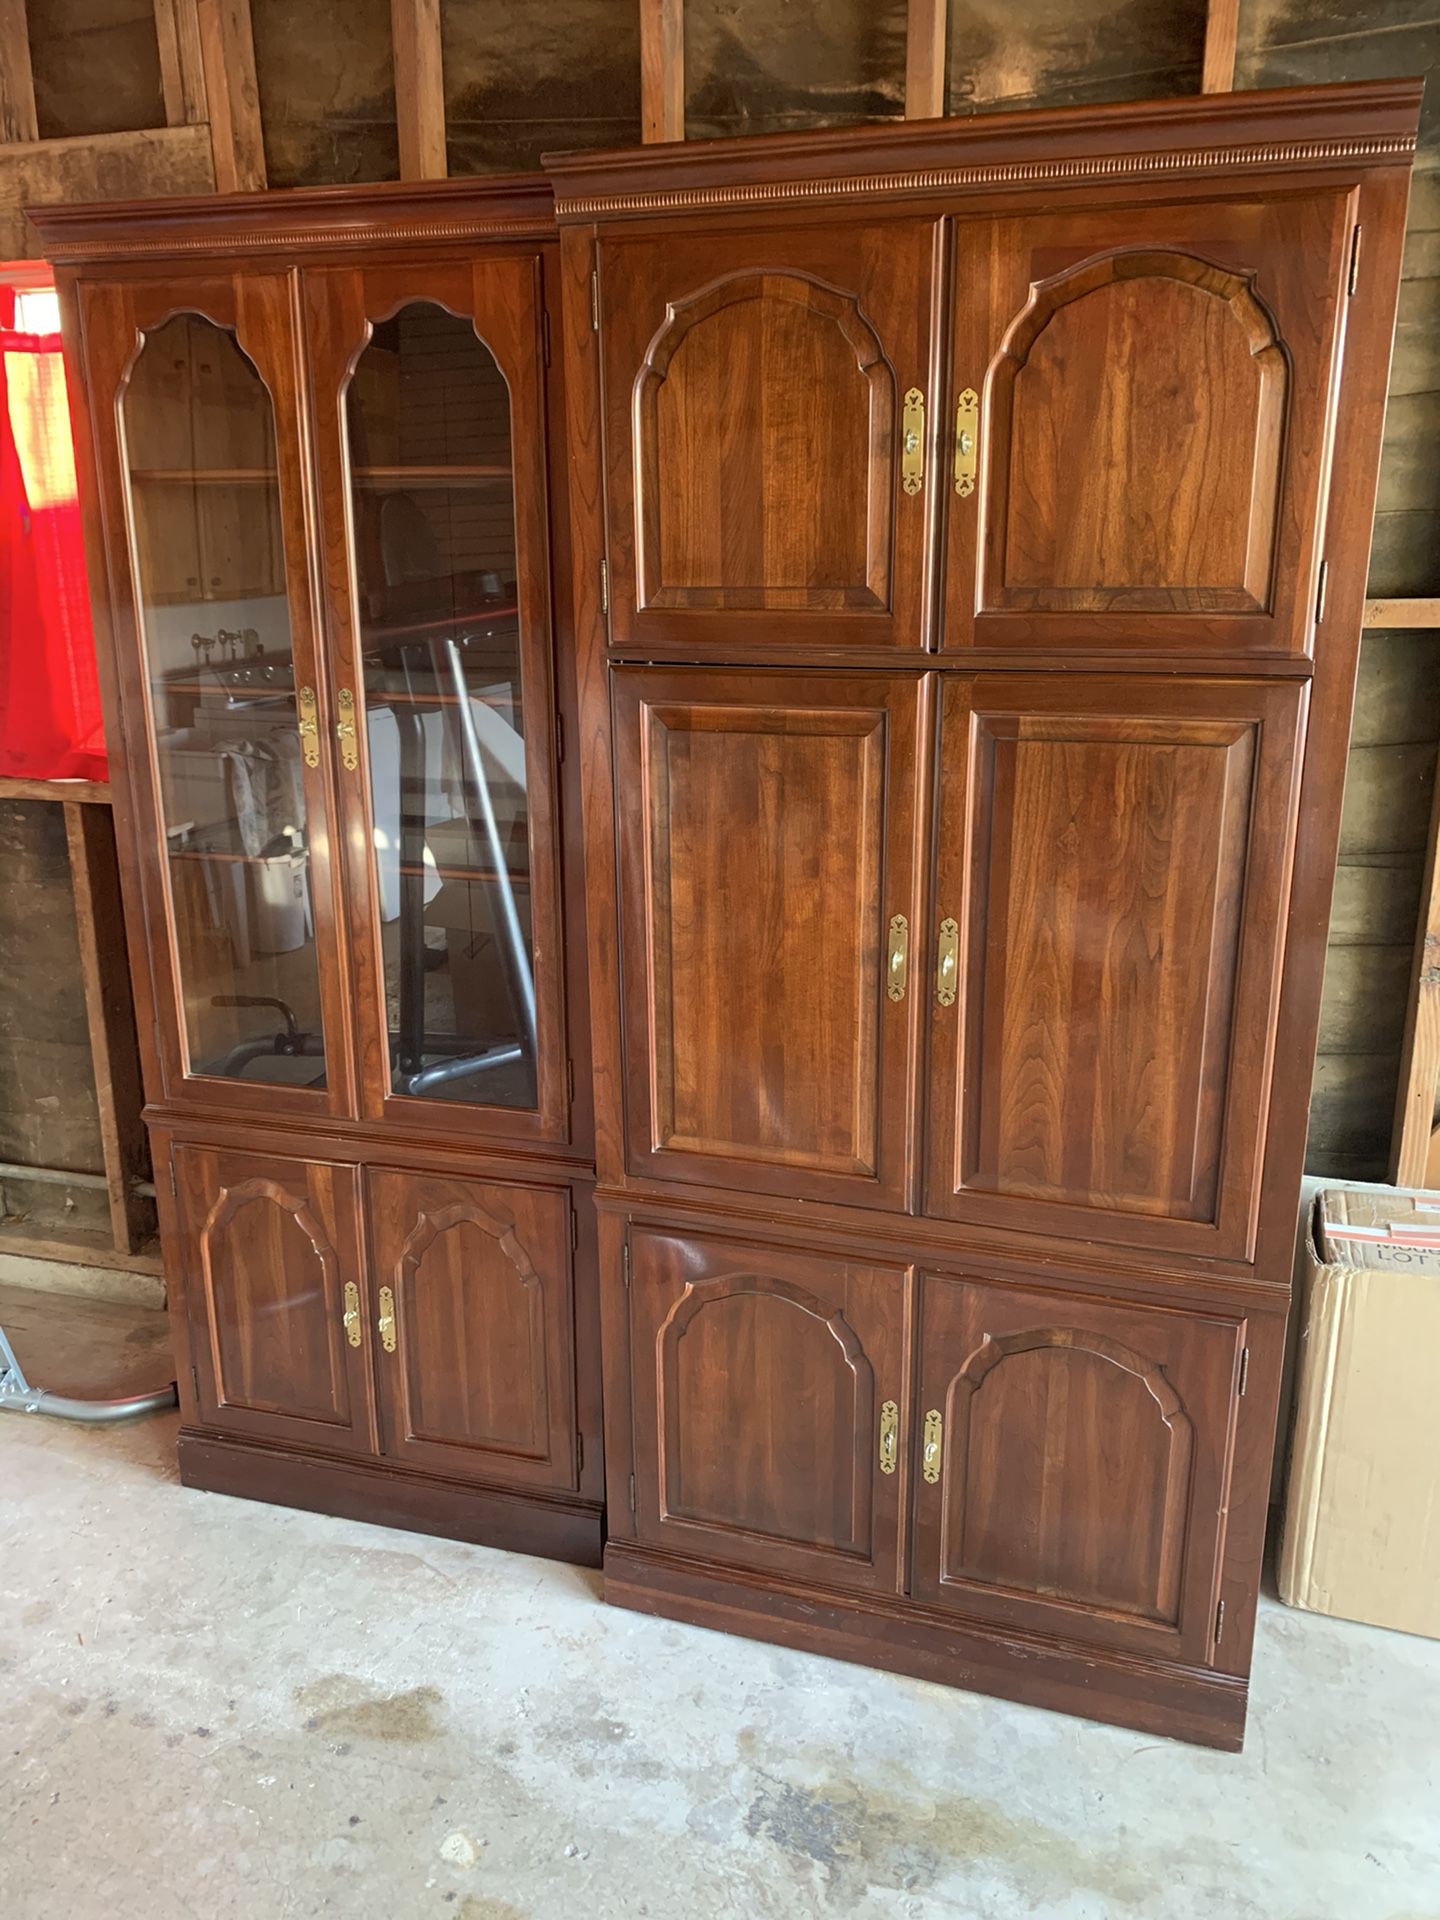 Beautiful hutch cabinet set! Very nice quality. Wood and Glass shelves.